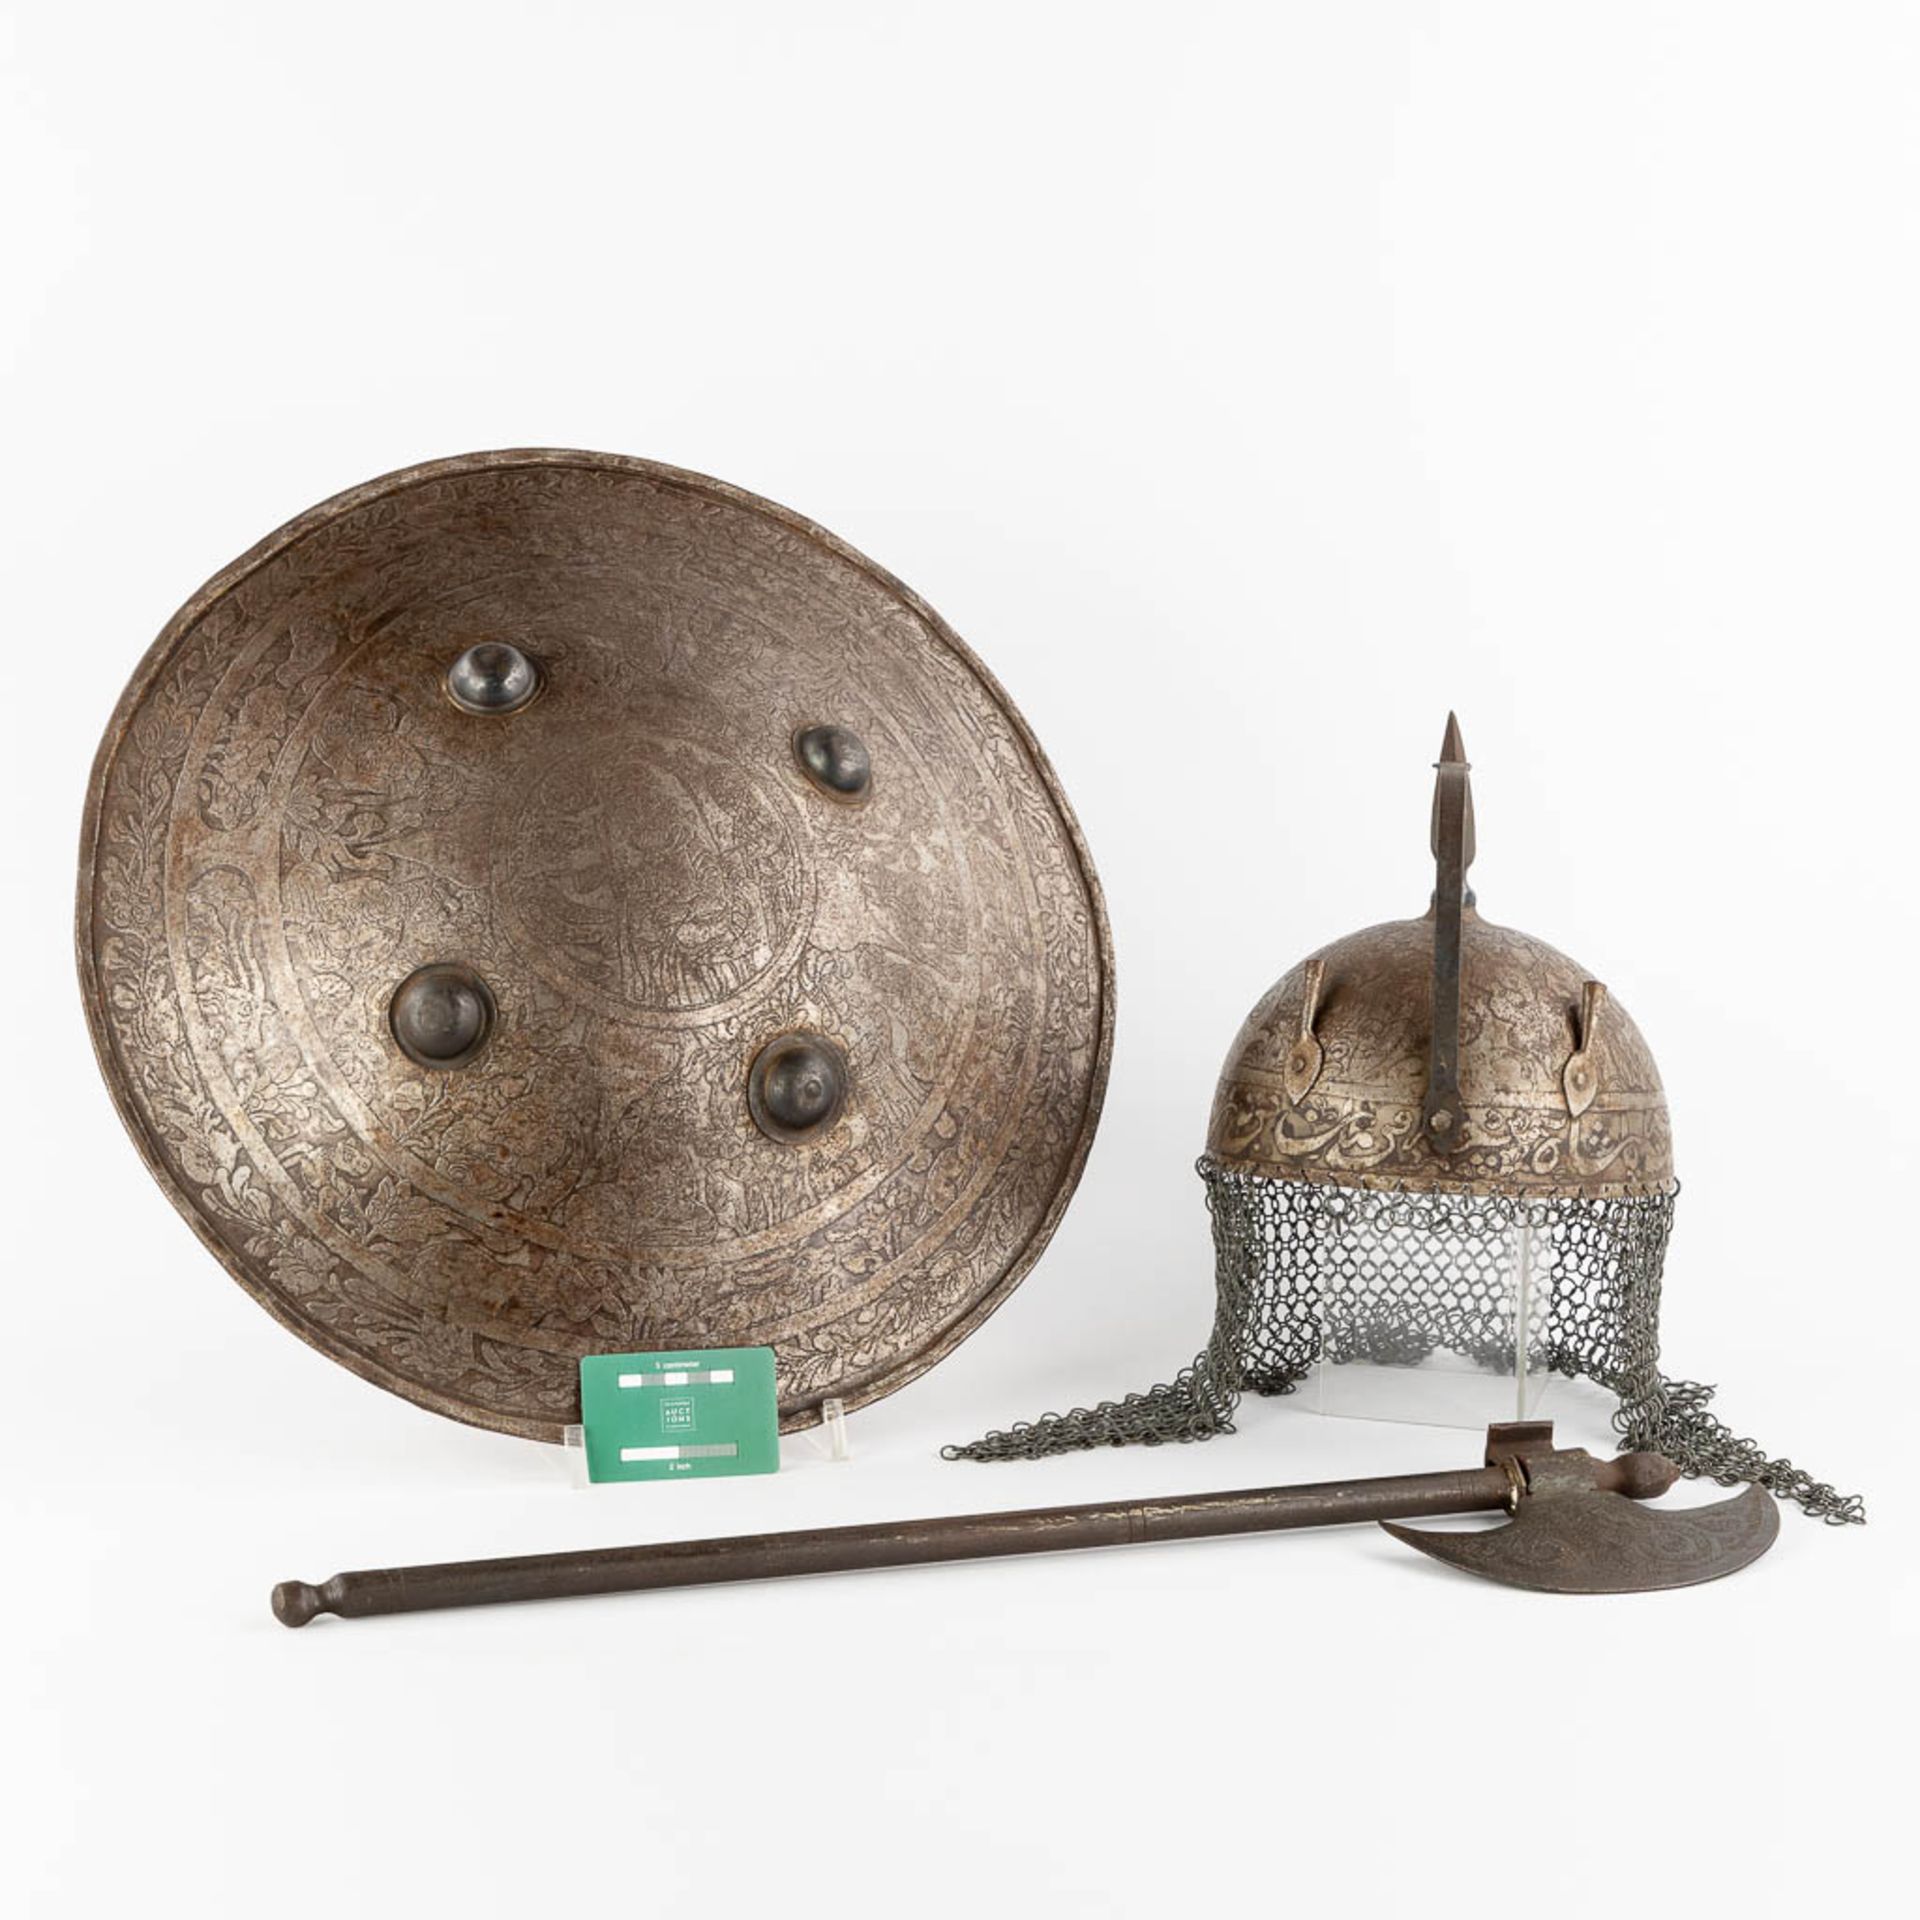 A decorative shield, axe and helmet in Ottoman style. 20th C. (D:48 cm) - Image 2 of 19